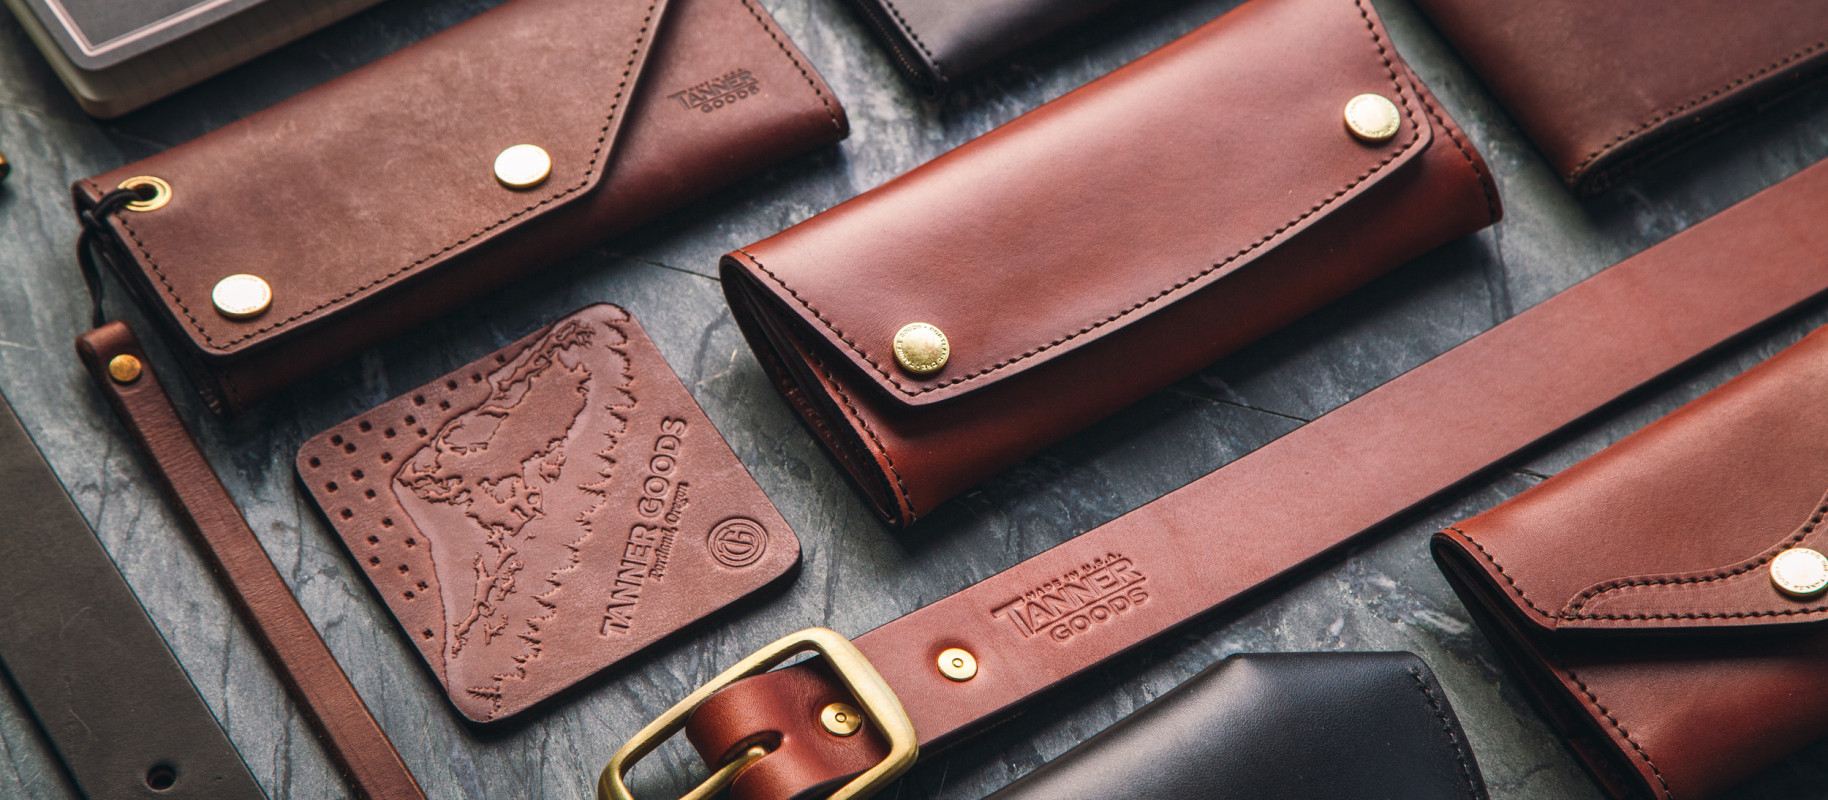 Custom Leather Wallet Manufacturer's Production Process